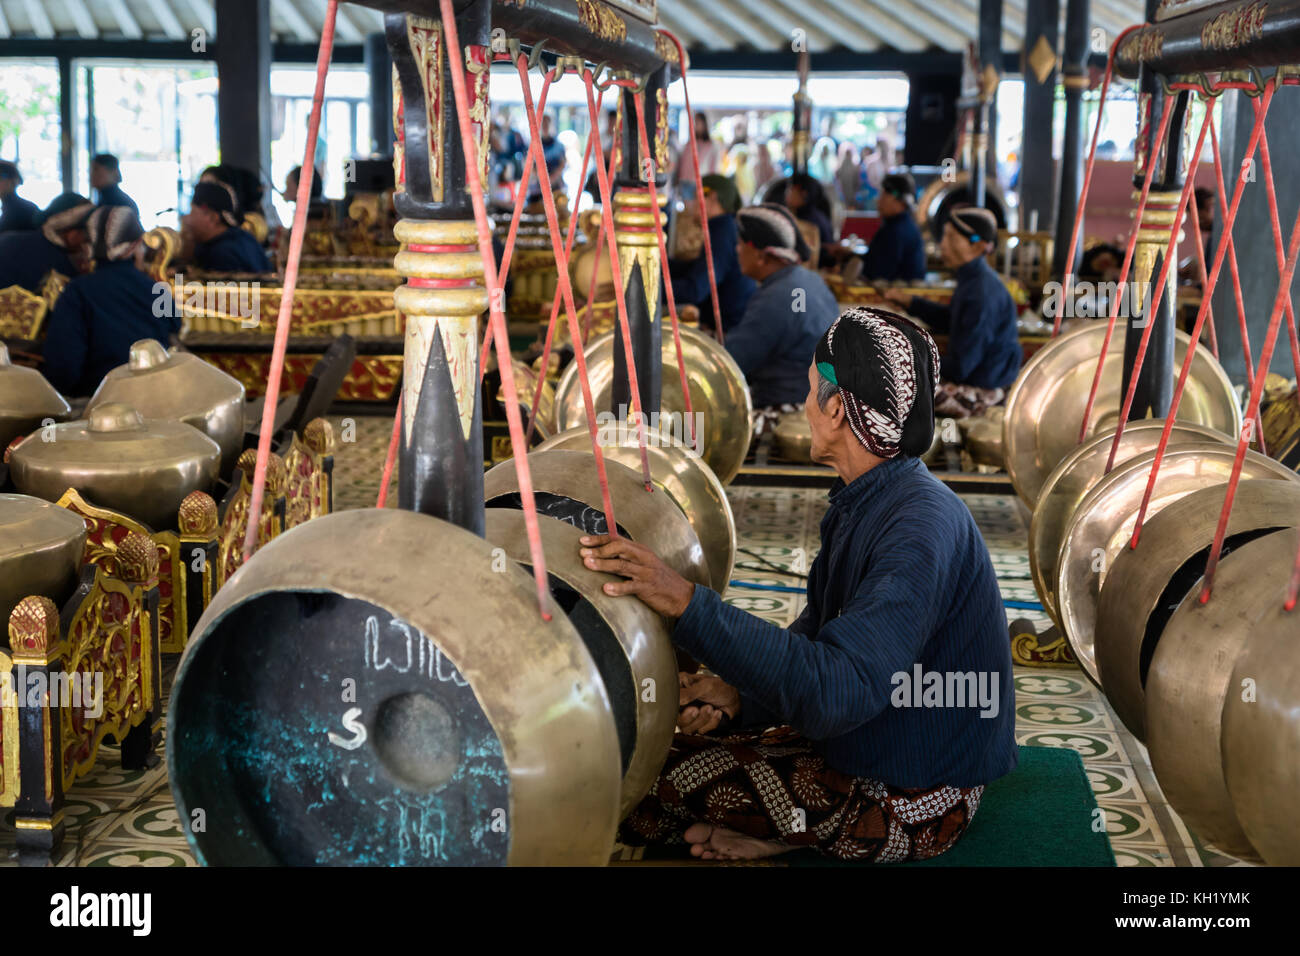 Yogyakarta, Indonesia - October 20171: Gamelan orchestra at Kraton grand palace ,Yogyakarta, Indonesia. Gamelan is a traditional music fin Indonesia Stock Photo